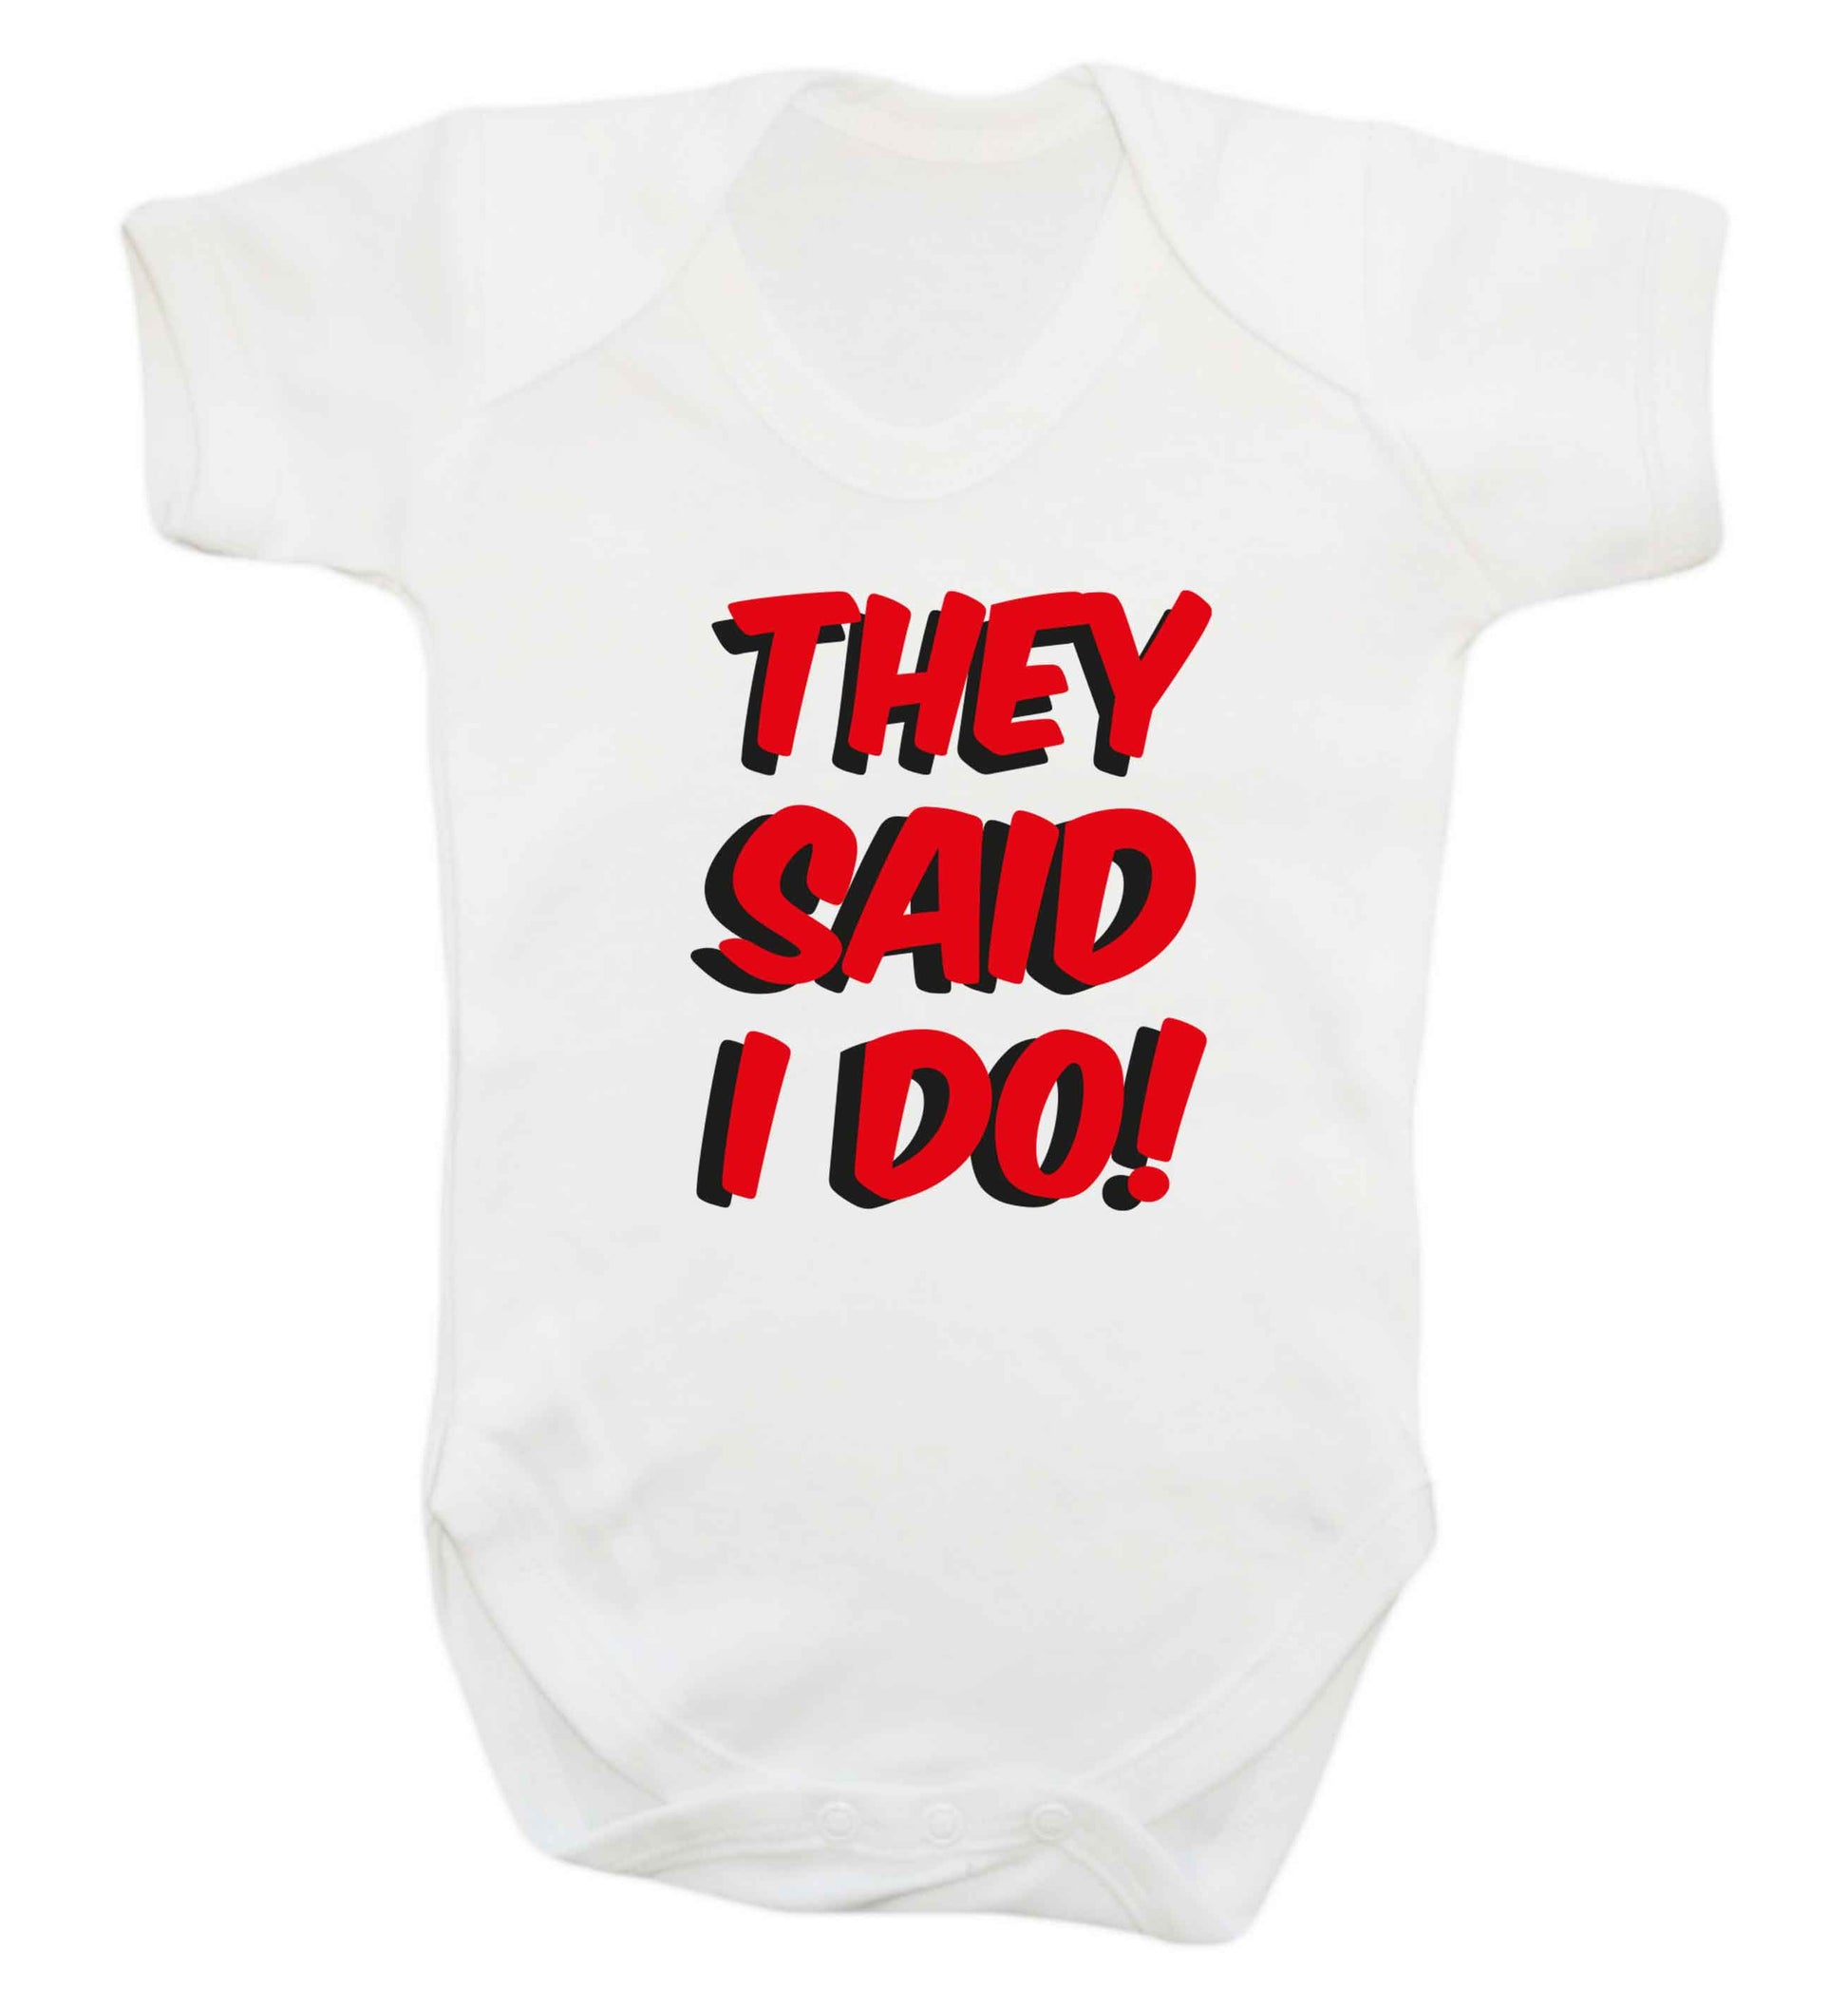 They said I do baby vest white 18-24 months